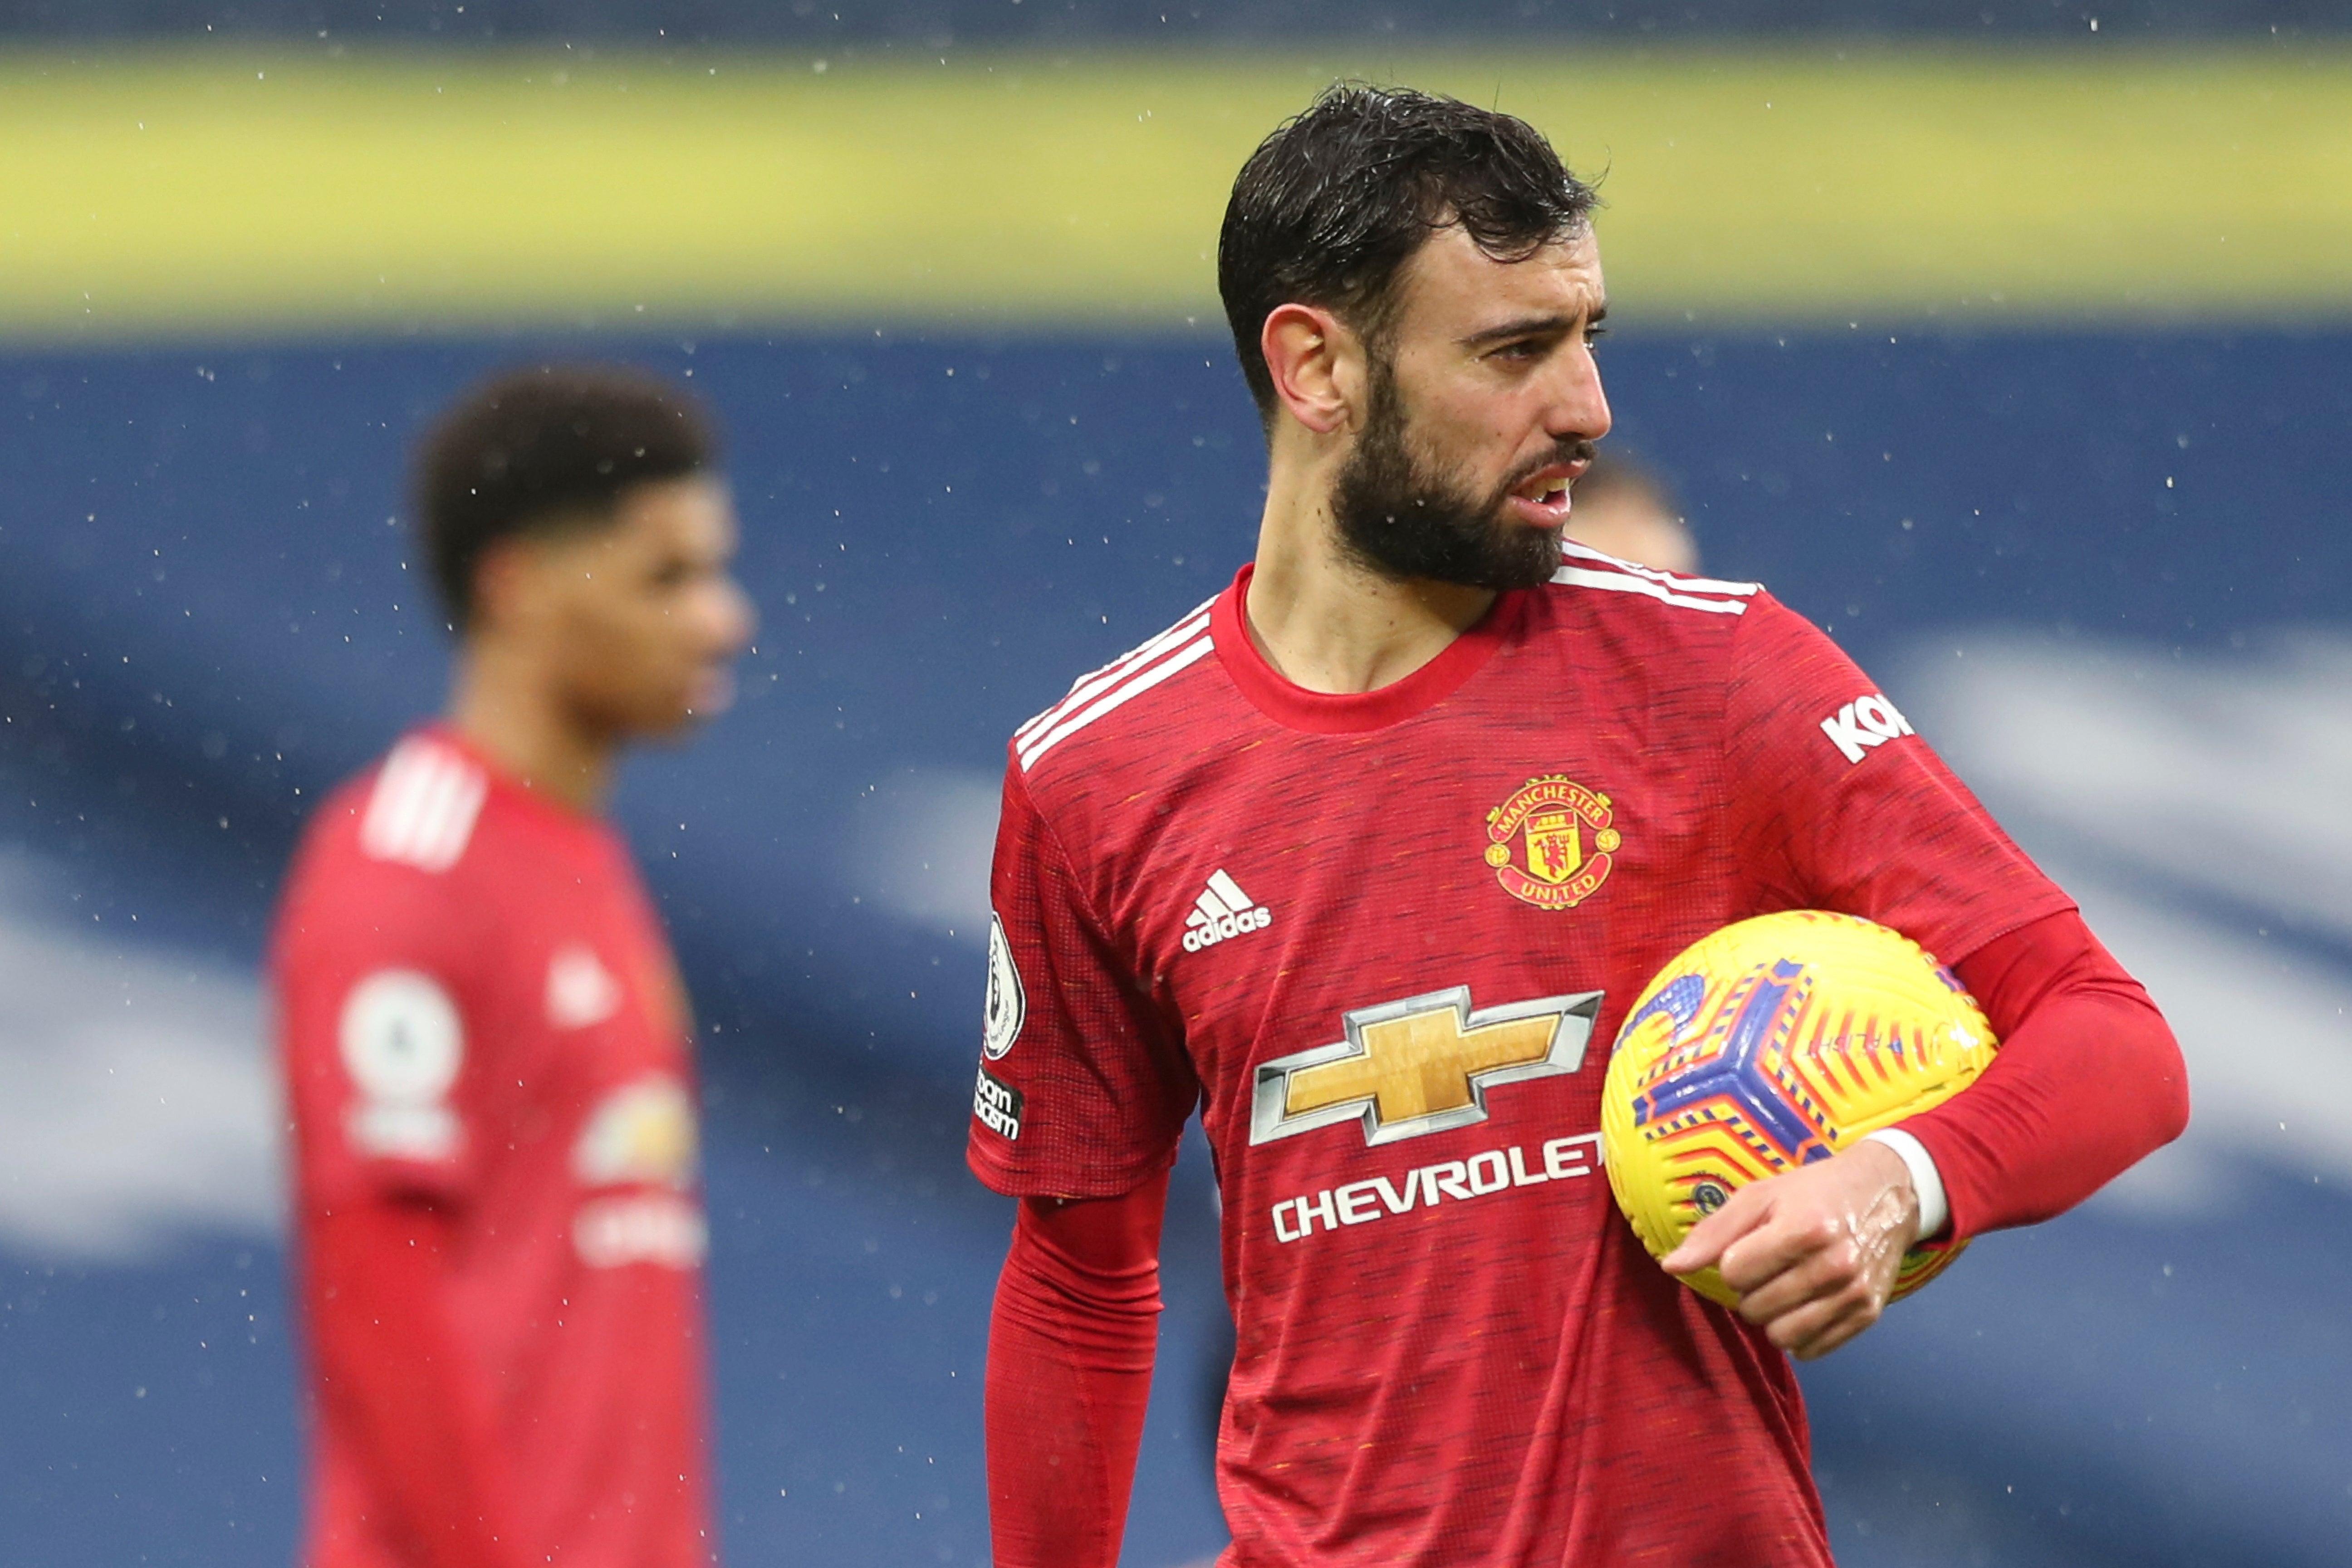 Bruno Fernandes has lifted United to new heights